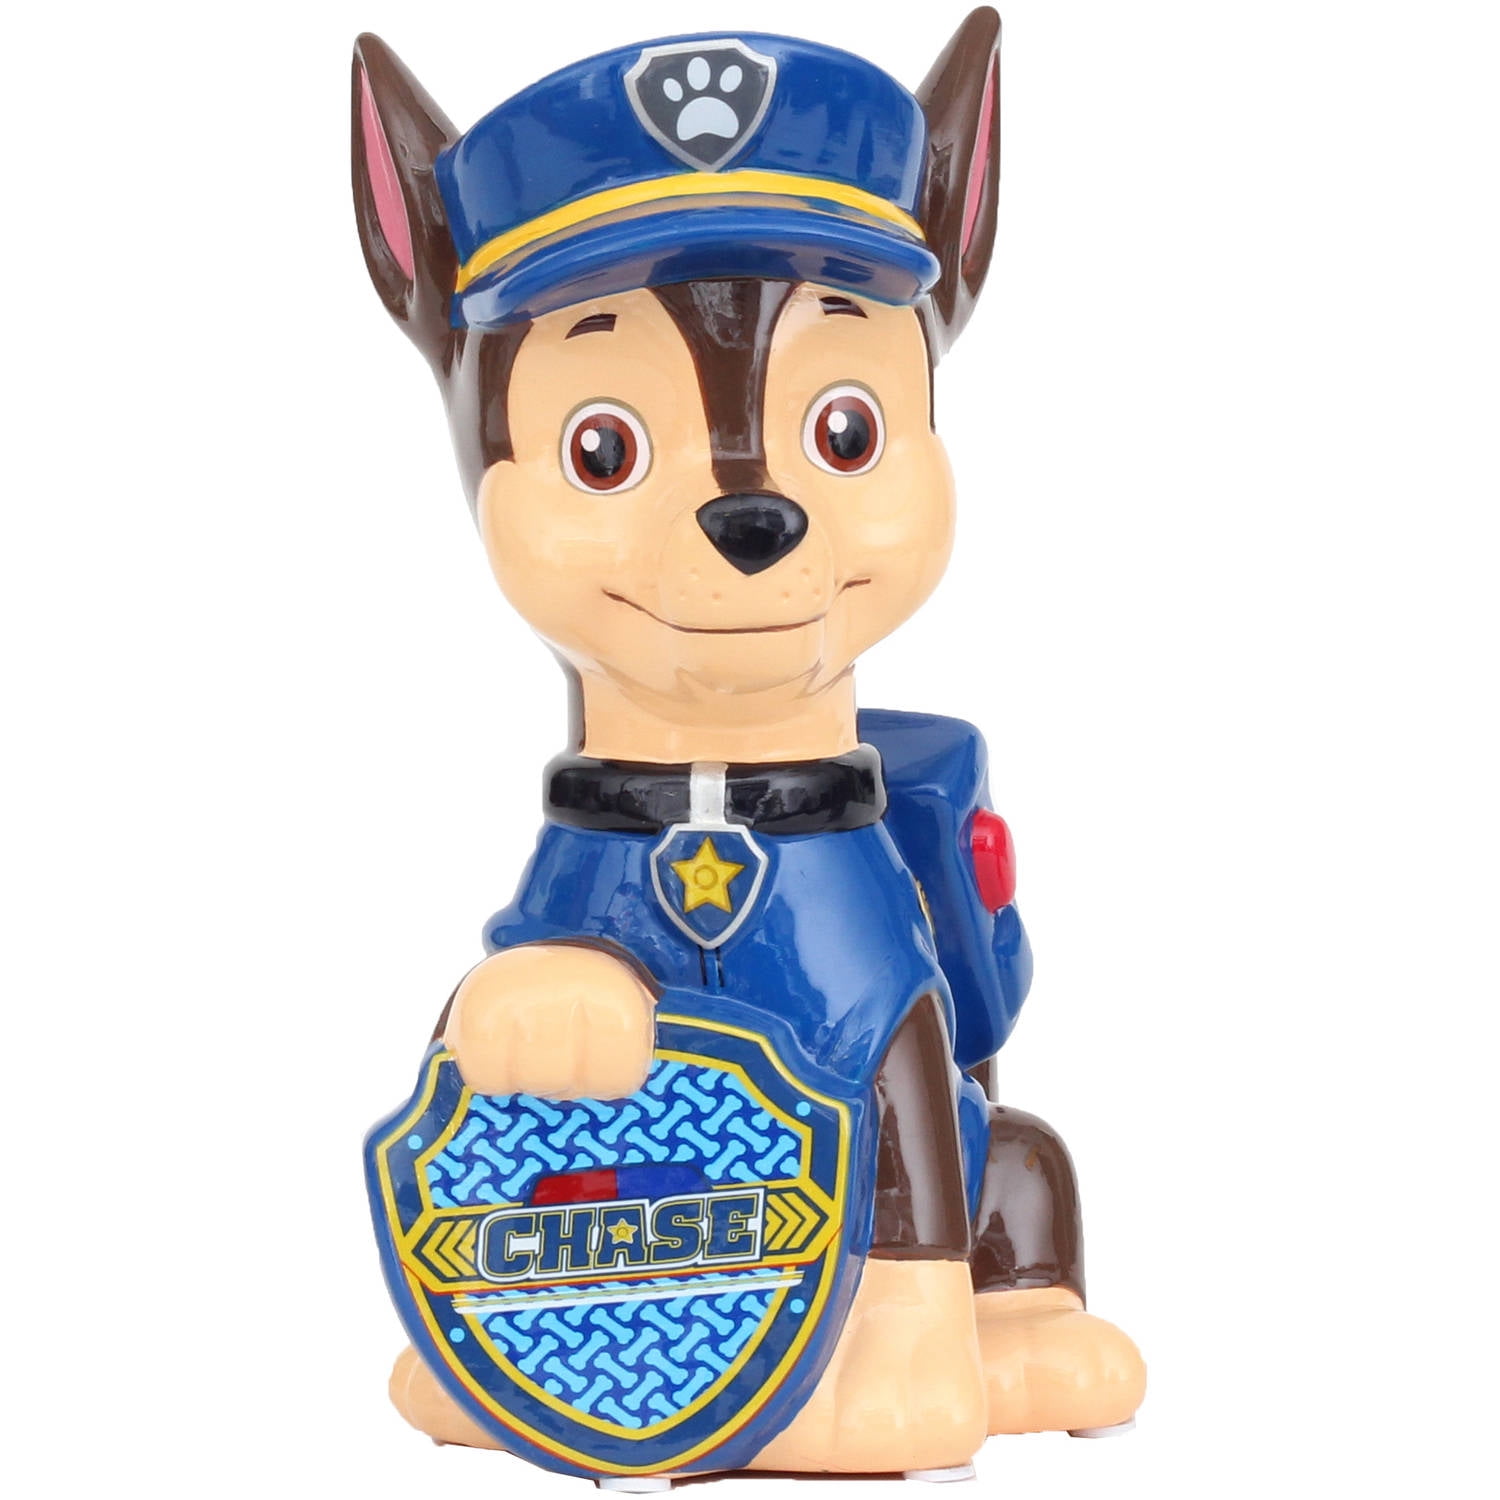 8" x 5" New! Paw Patrol Chase Ceramic Coin Piggy Bank